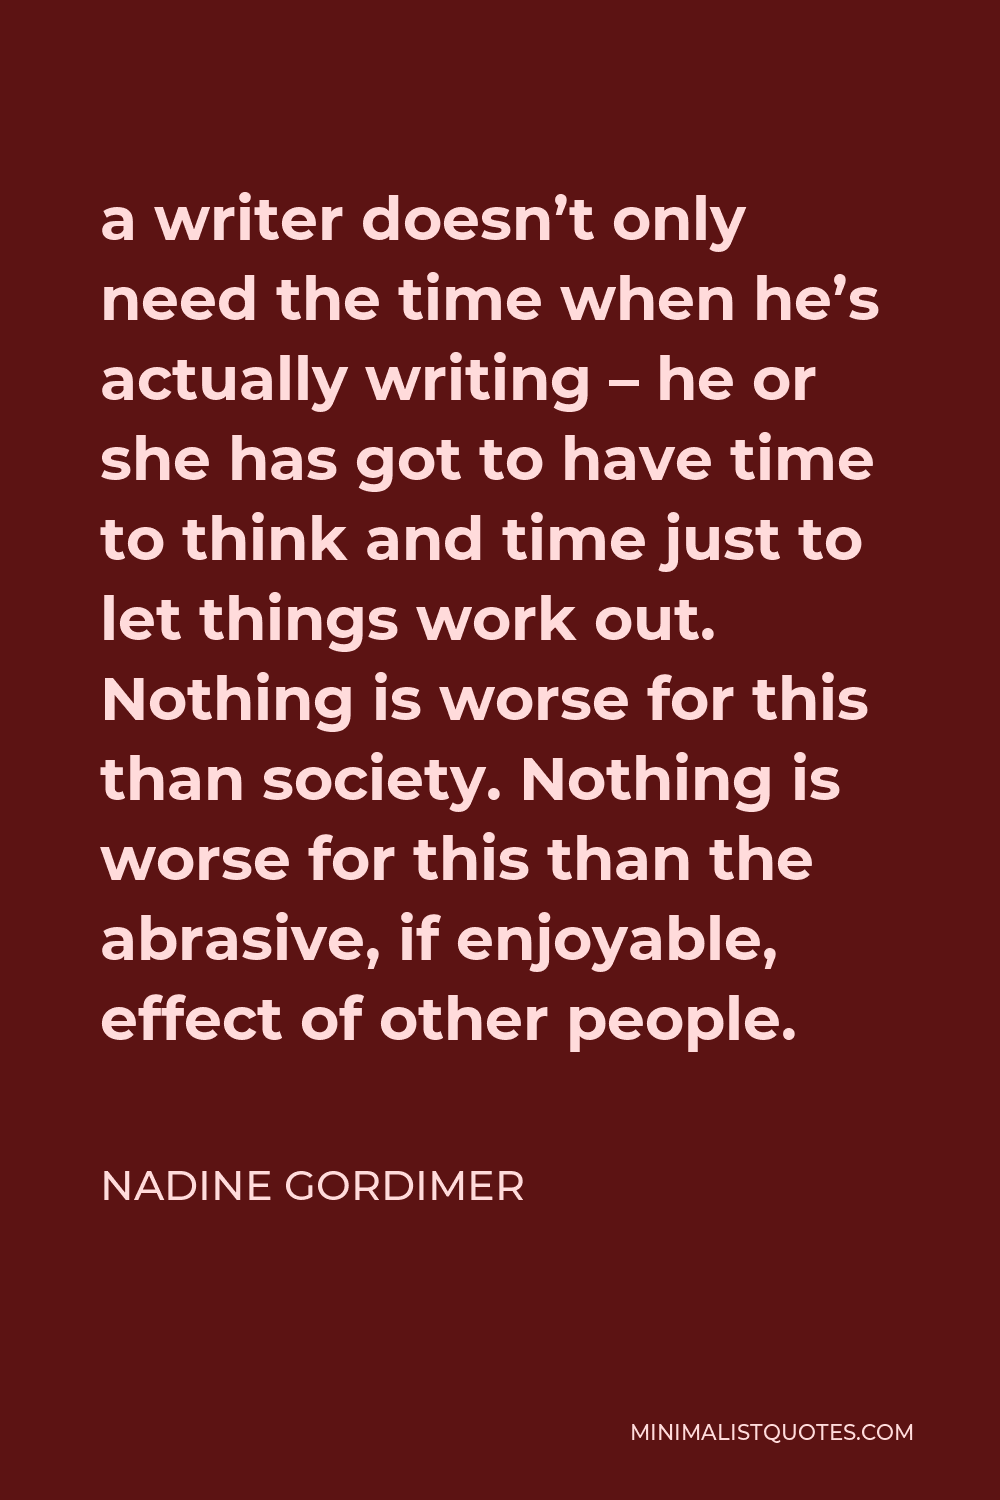 Nadine Gordimer Quote - a writer doesn’t only need the time when he’s actually writing – he or she has got to have time to think and time just to let things work out. Nothing is worse for this than society. Nothing is worse for this than the abrasive, if enjoyable, effect of other people.